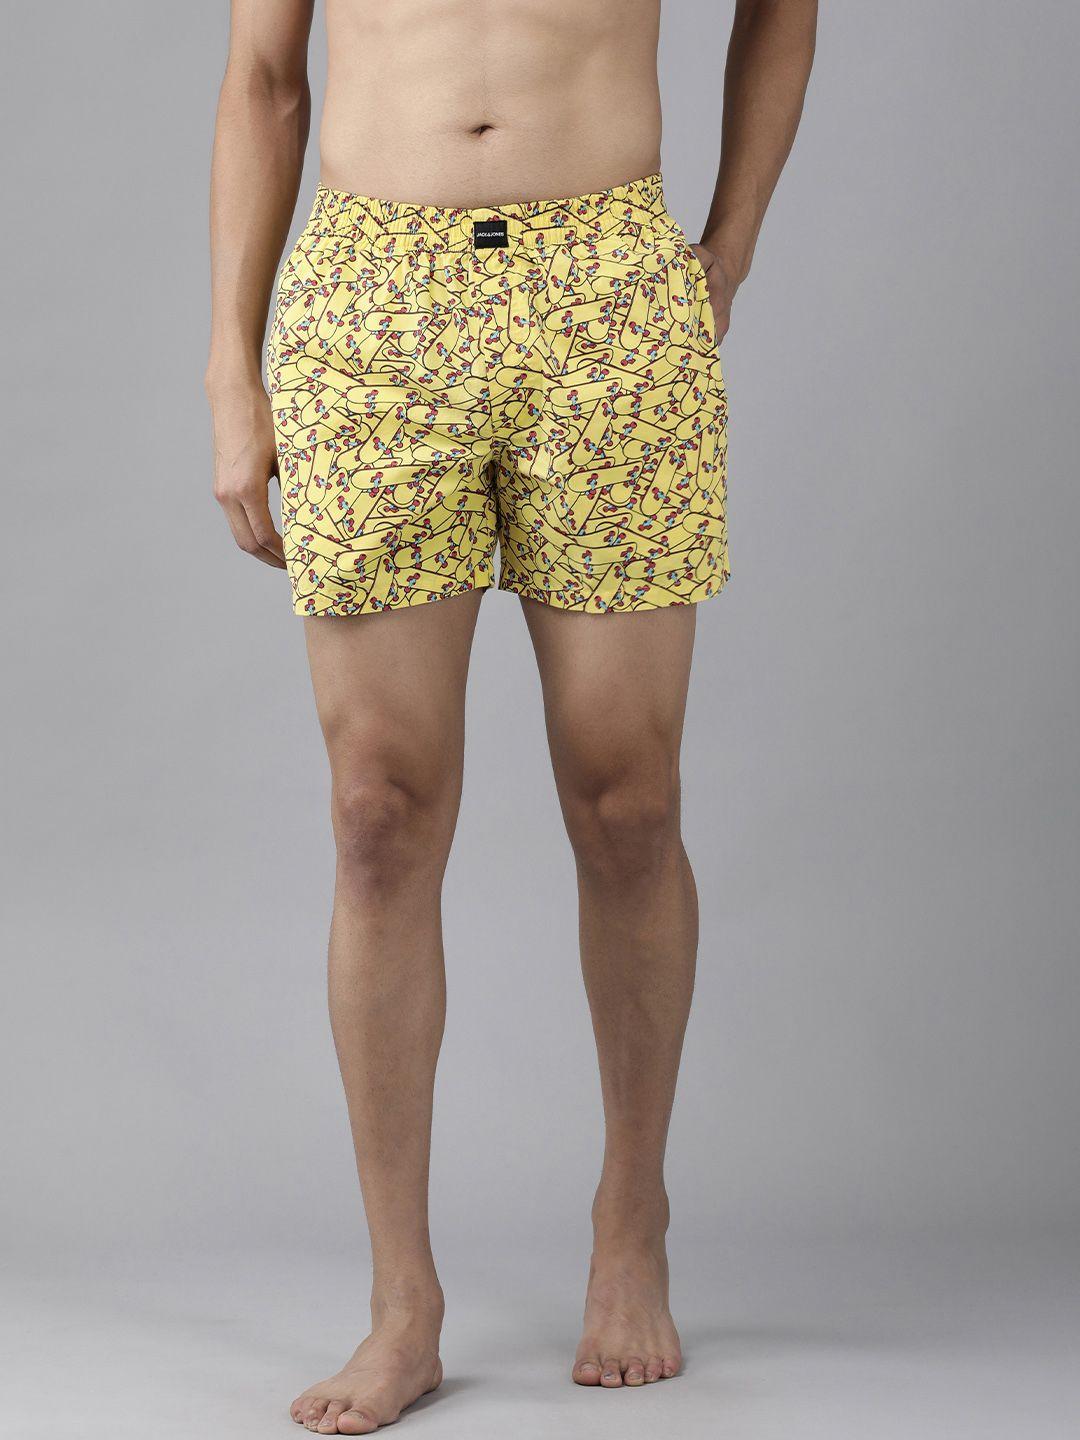 jack & jones men yellow and red printed pure cotton boxers 2049397001